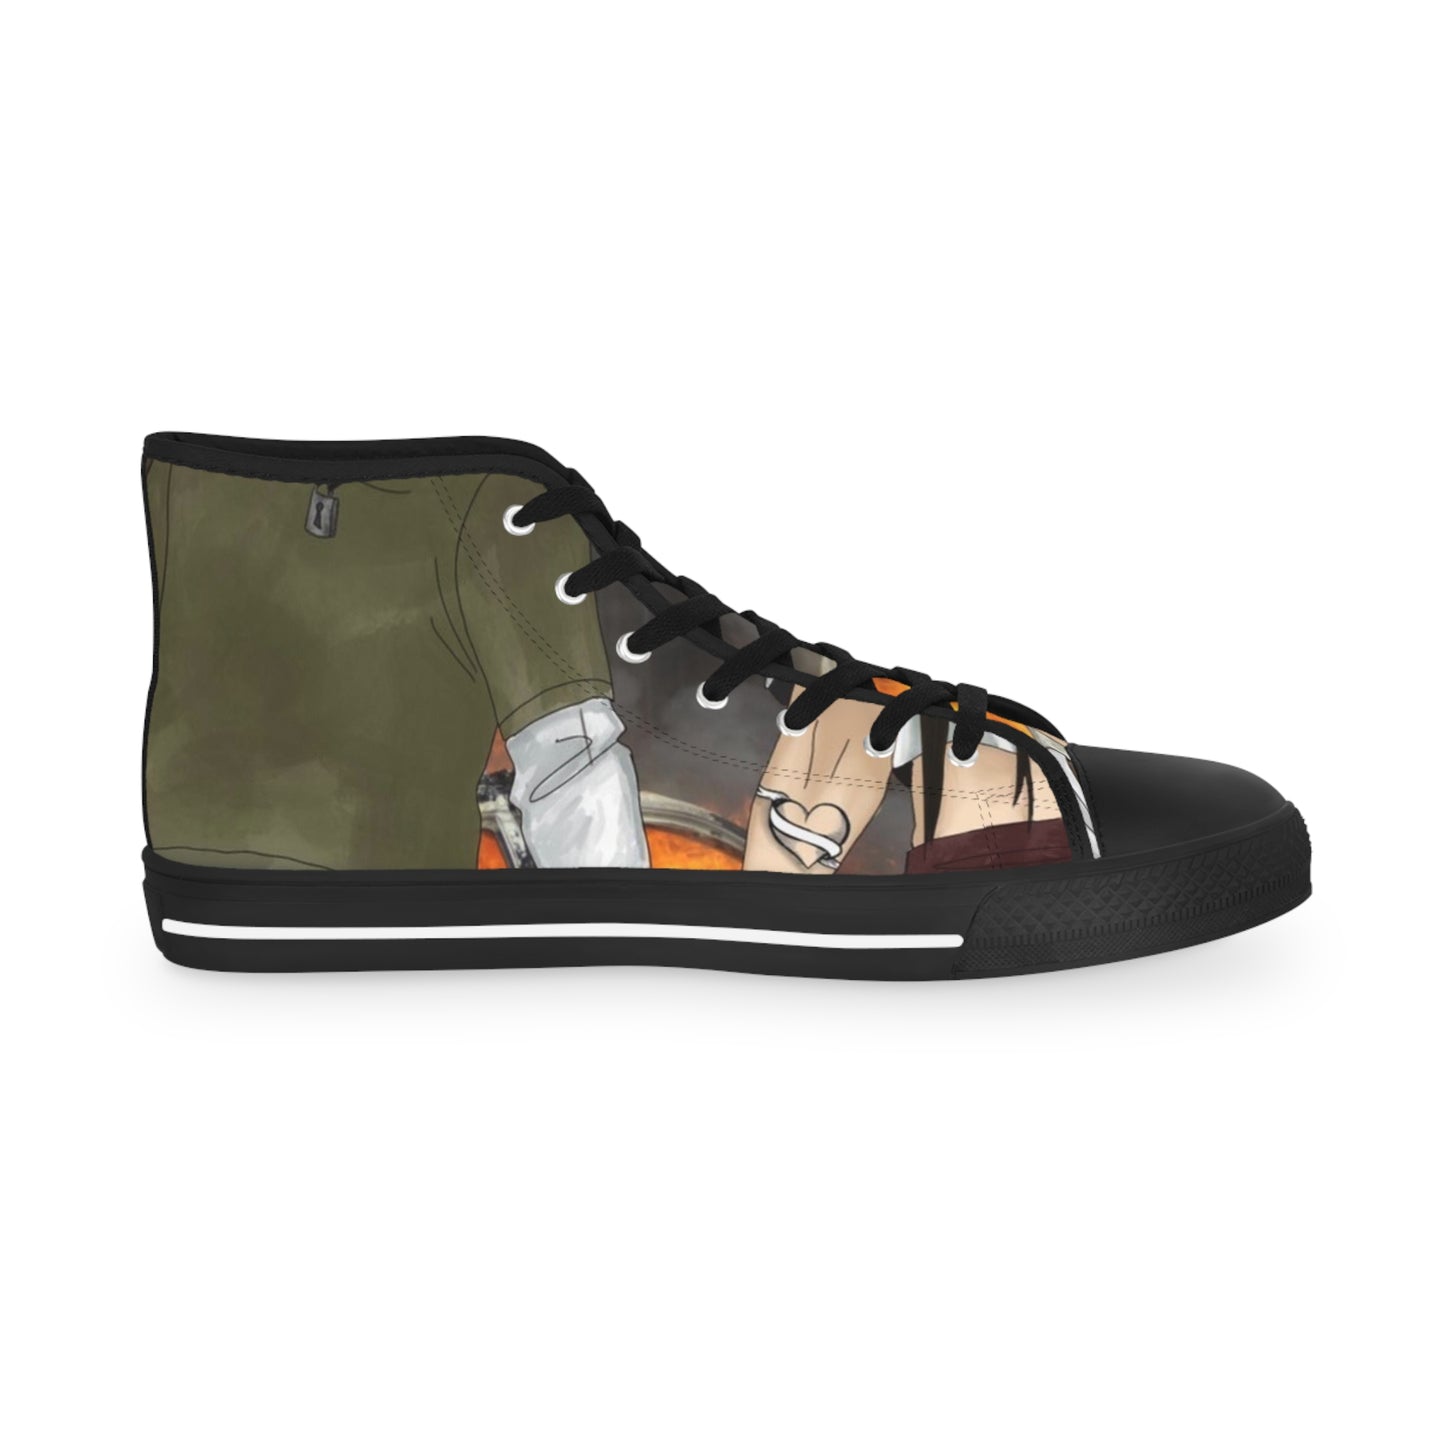 “Through hell and back” Men's High Top Sneakers